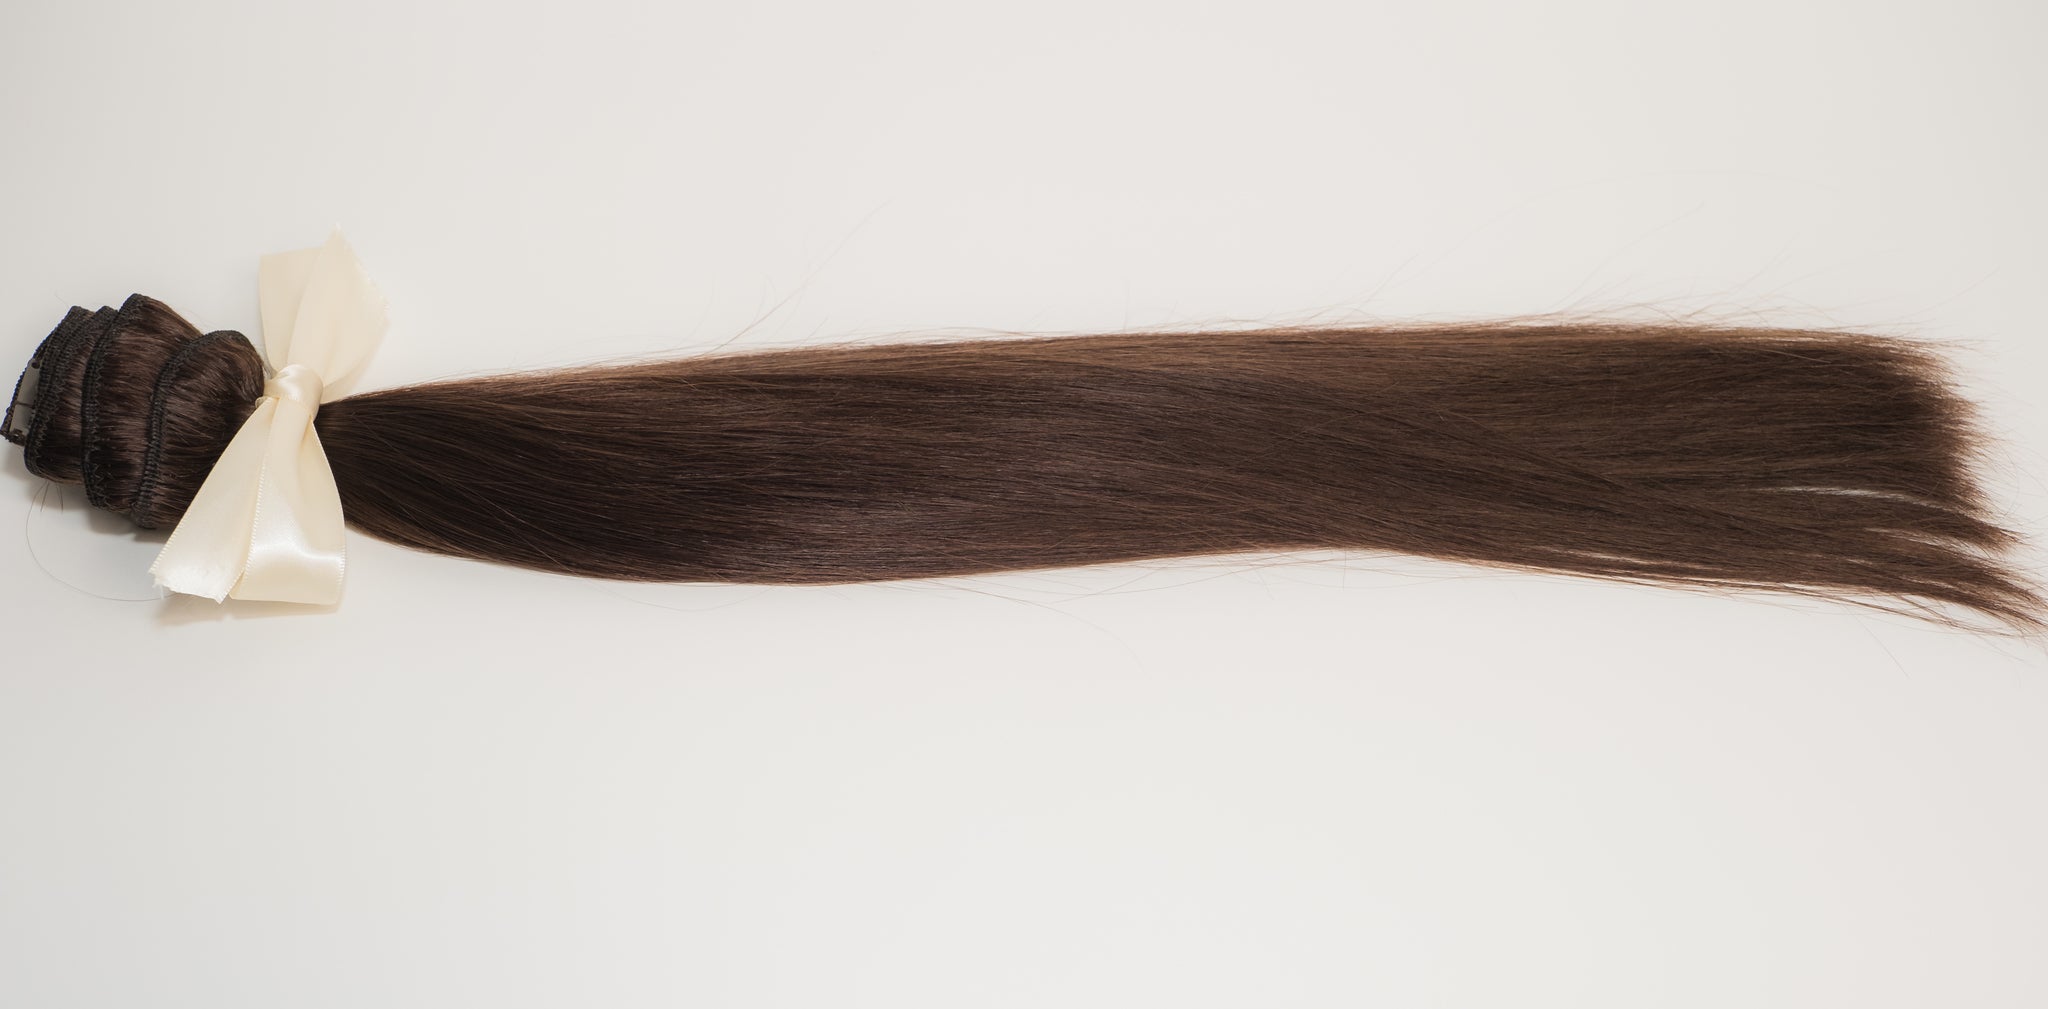 18" Clip In Hair Extensions Deluxe Box ($339.00 - $359.00)